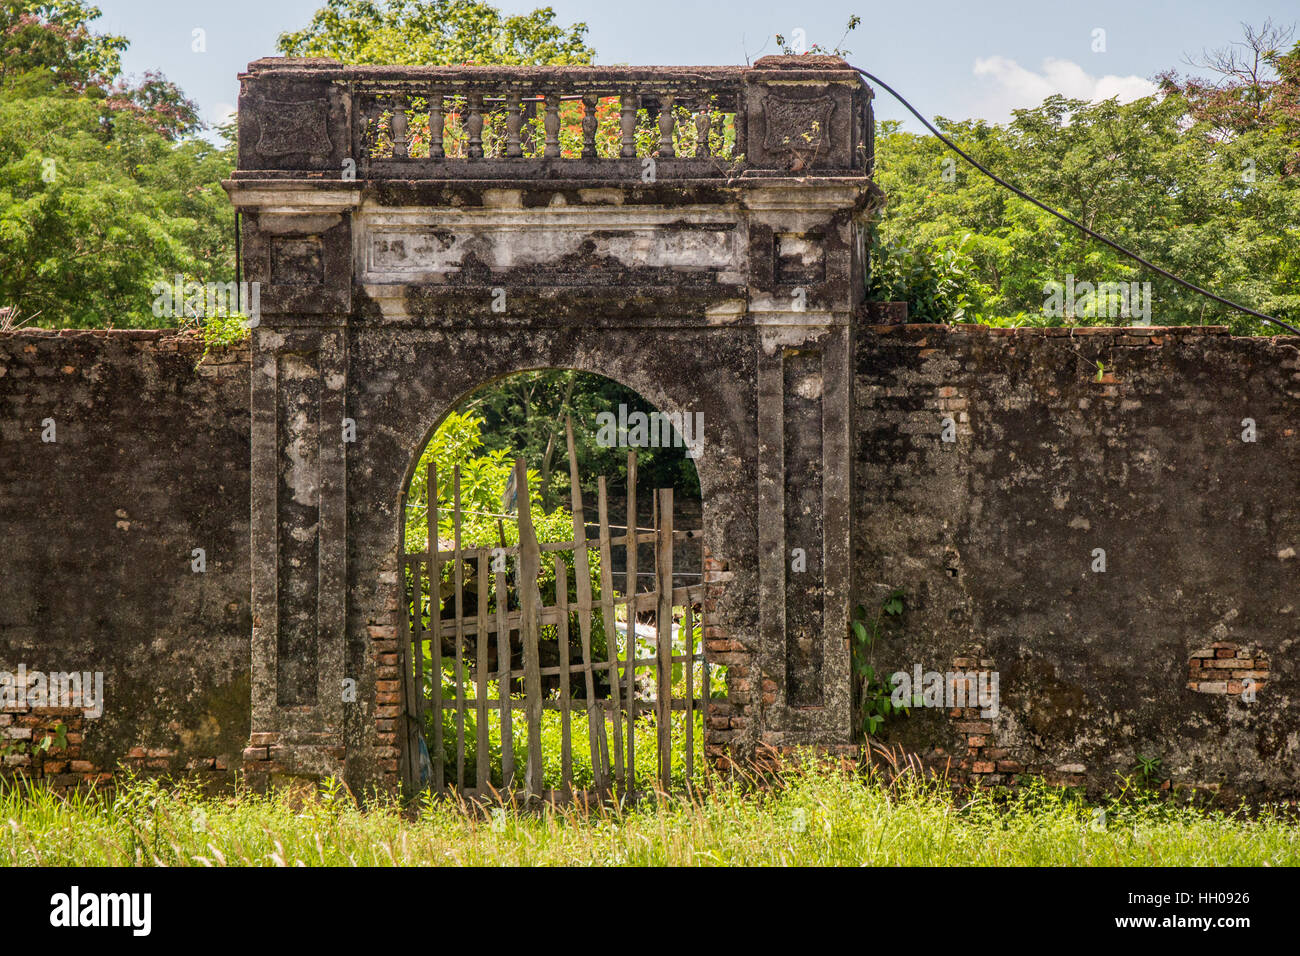 The ruins of an old weathered entrance gate in the walled Citadel and Imperial Palace in Hue.  Its is a UNESCO World Heritage. Stock Photo